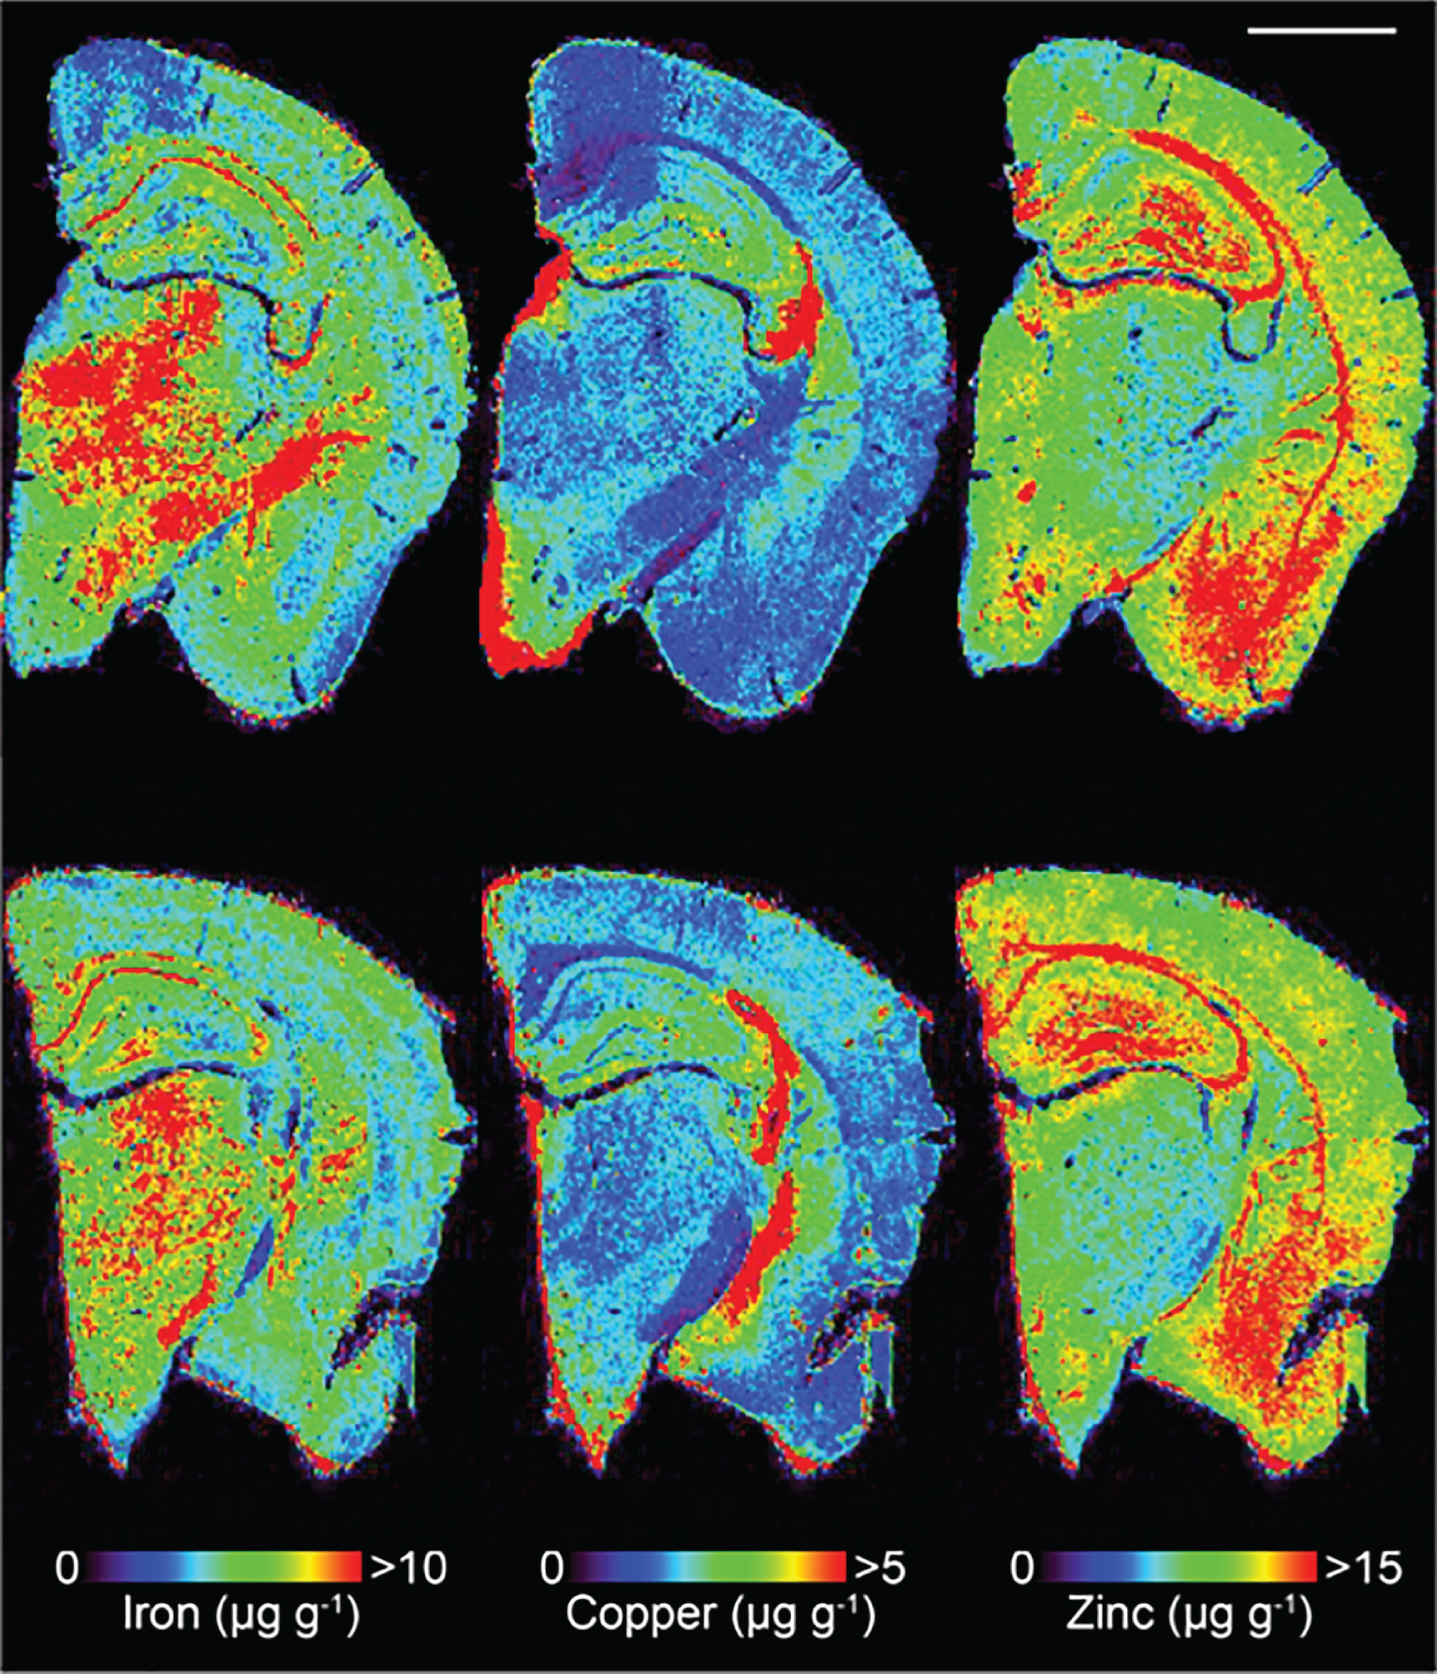 Representative LA-ICPMS schematic of SSV (top row) and trehalose (bottom row) treated Tg2576 brain sections showing Fe, Cu, and Zn. Scale bar = 1 mm.